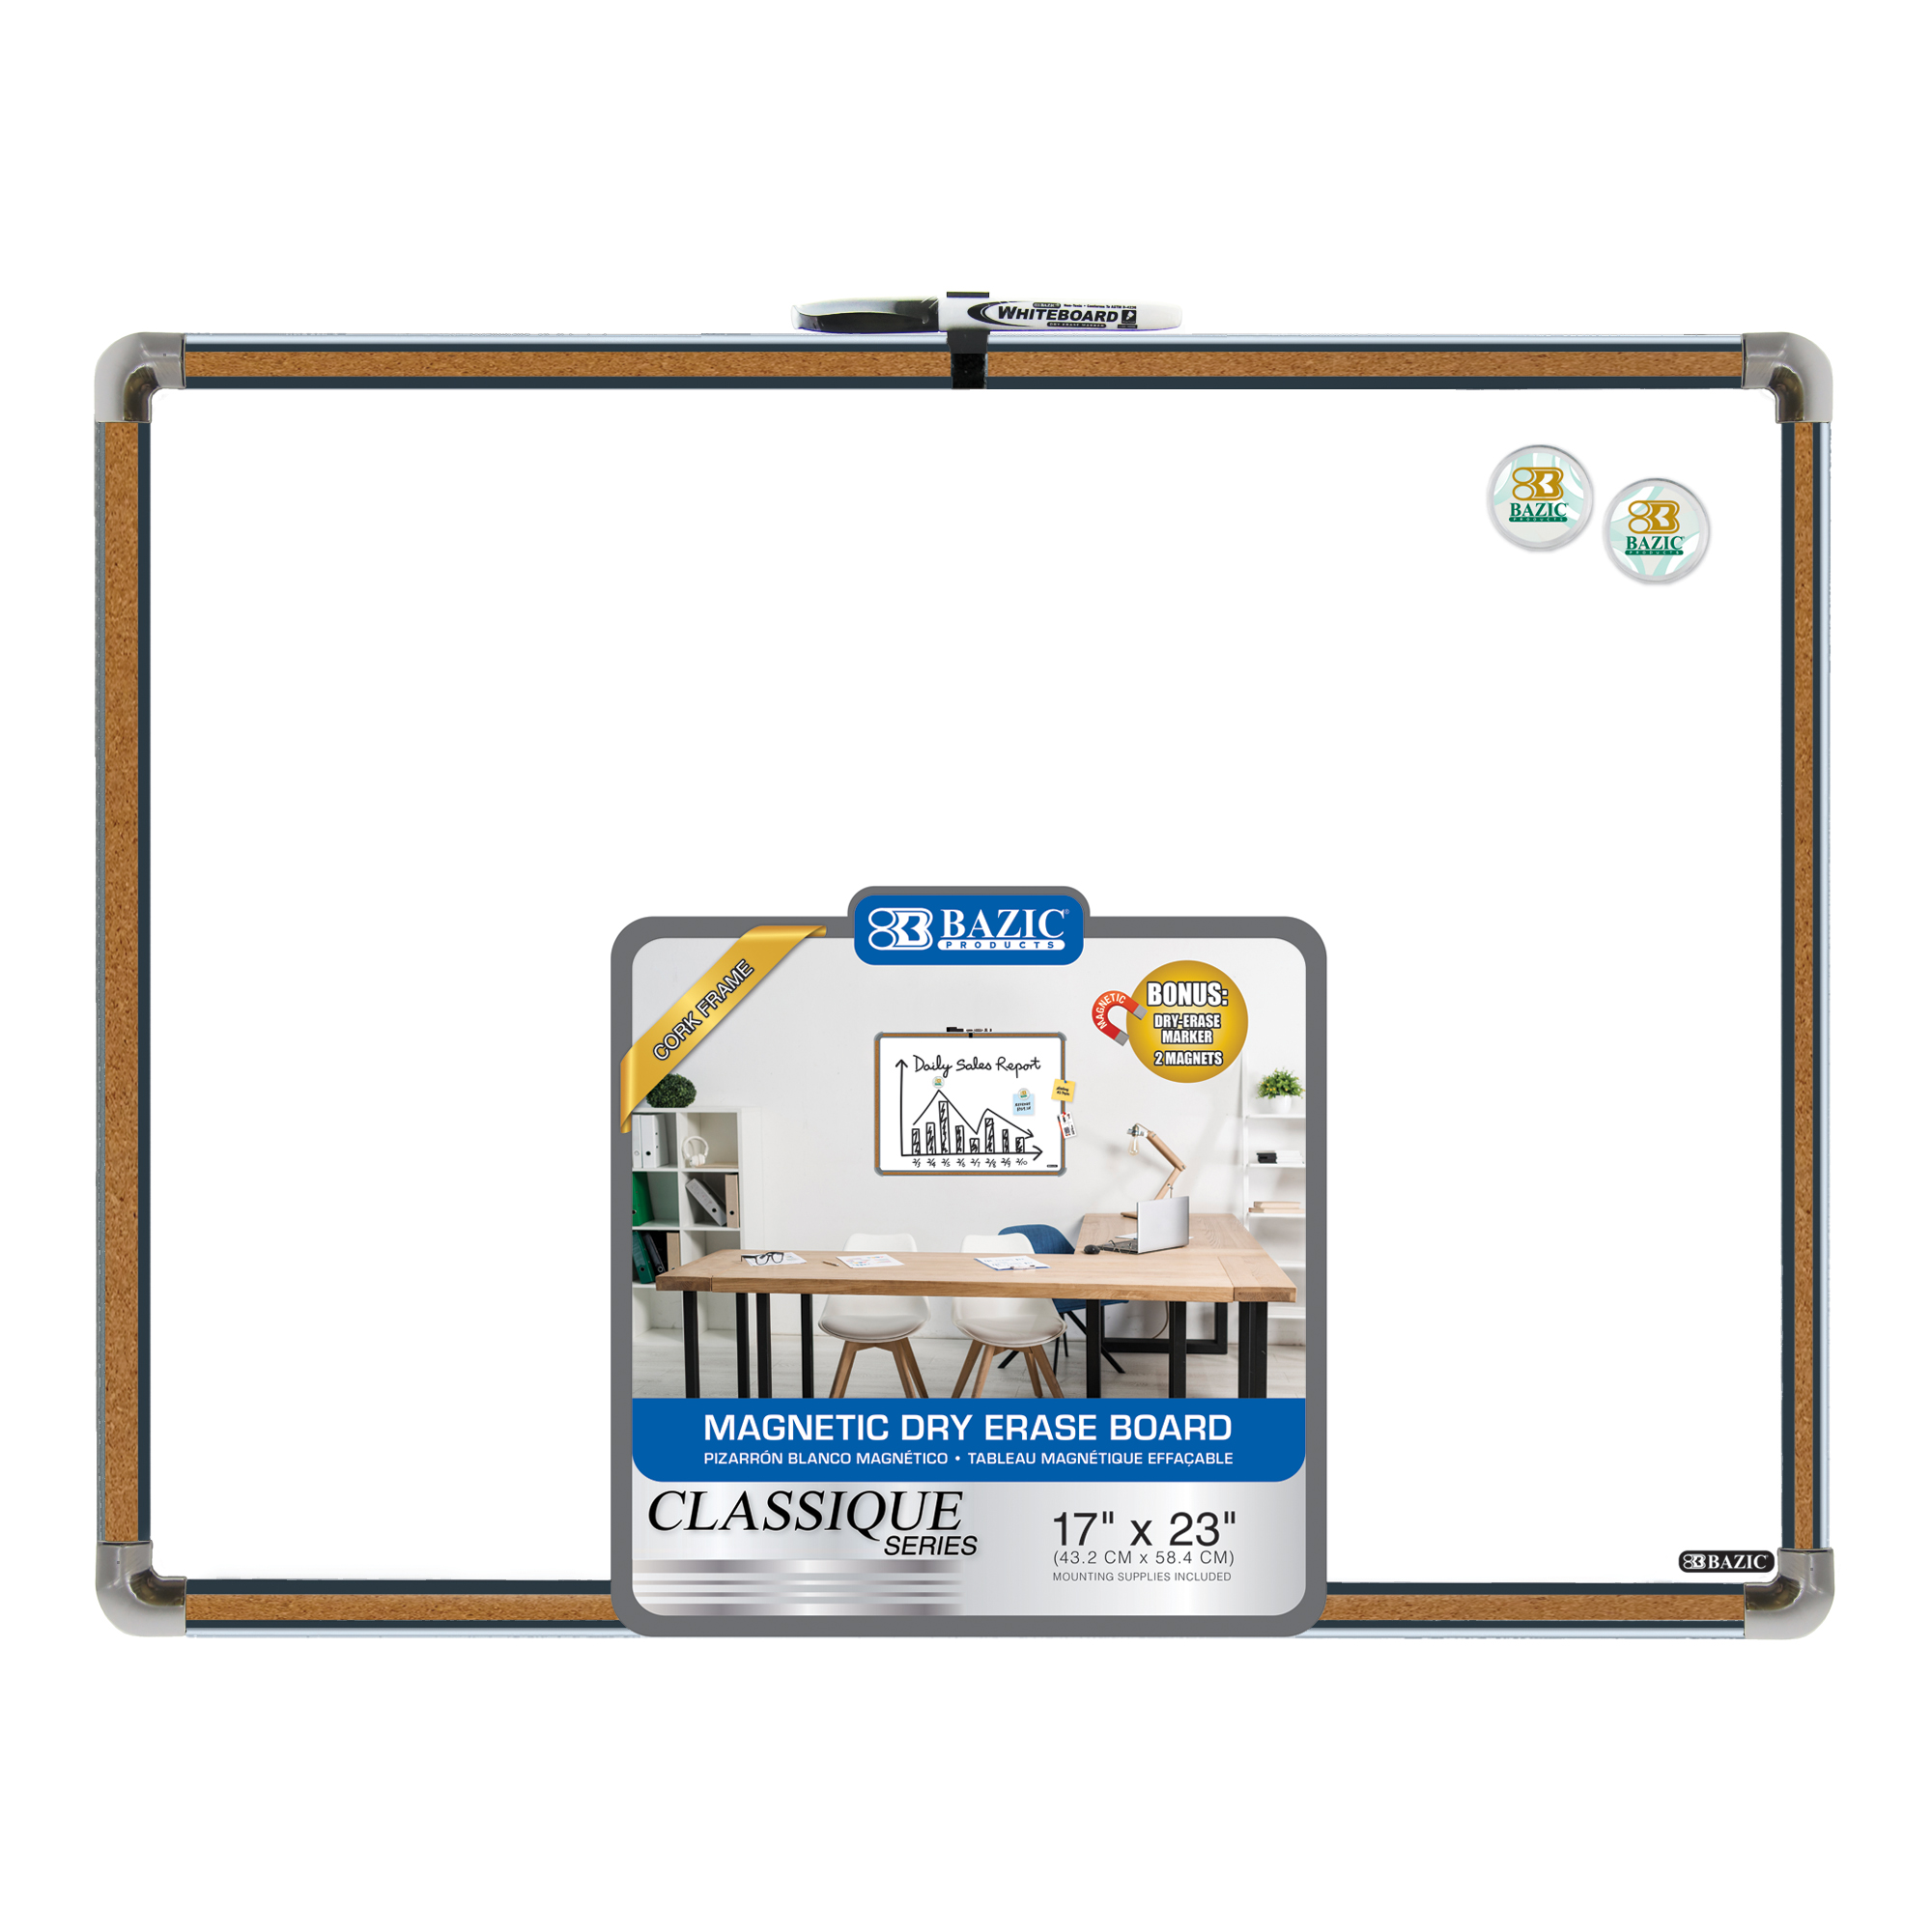 The to Do List Dry Erase Memo Board, Black, Sold by at Home